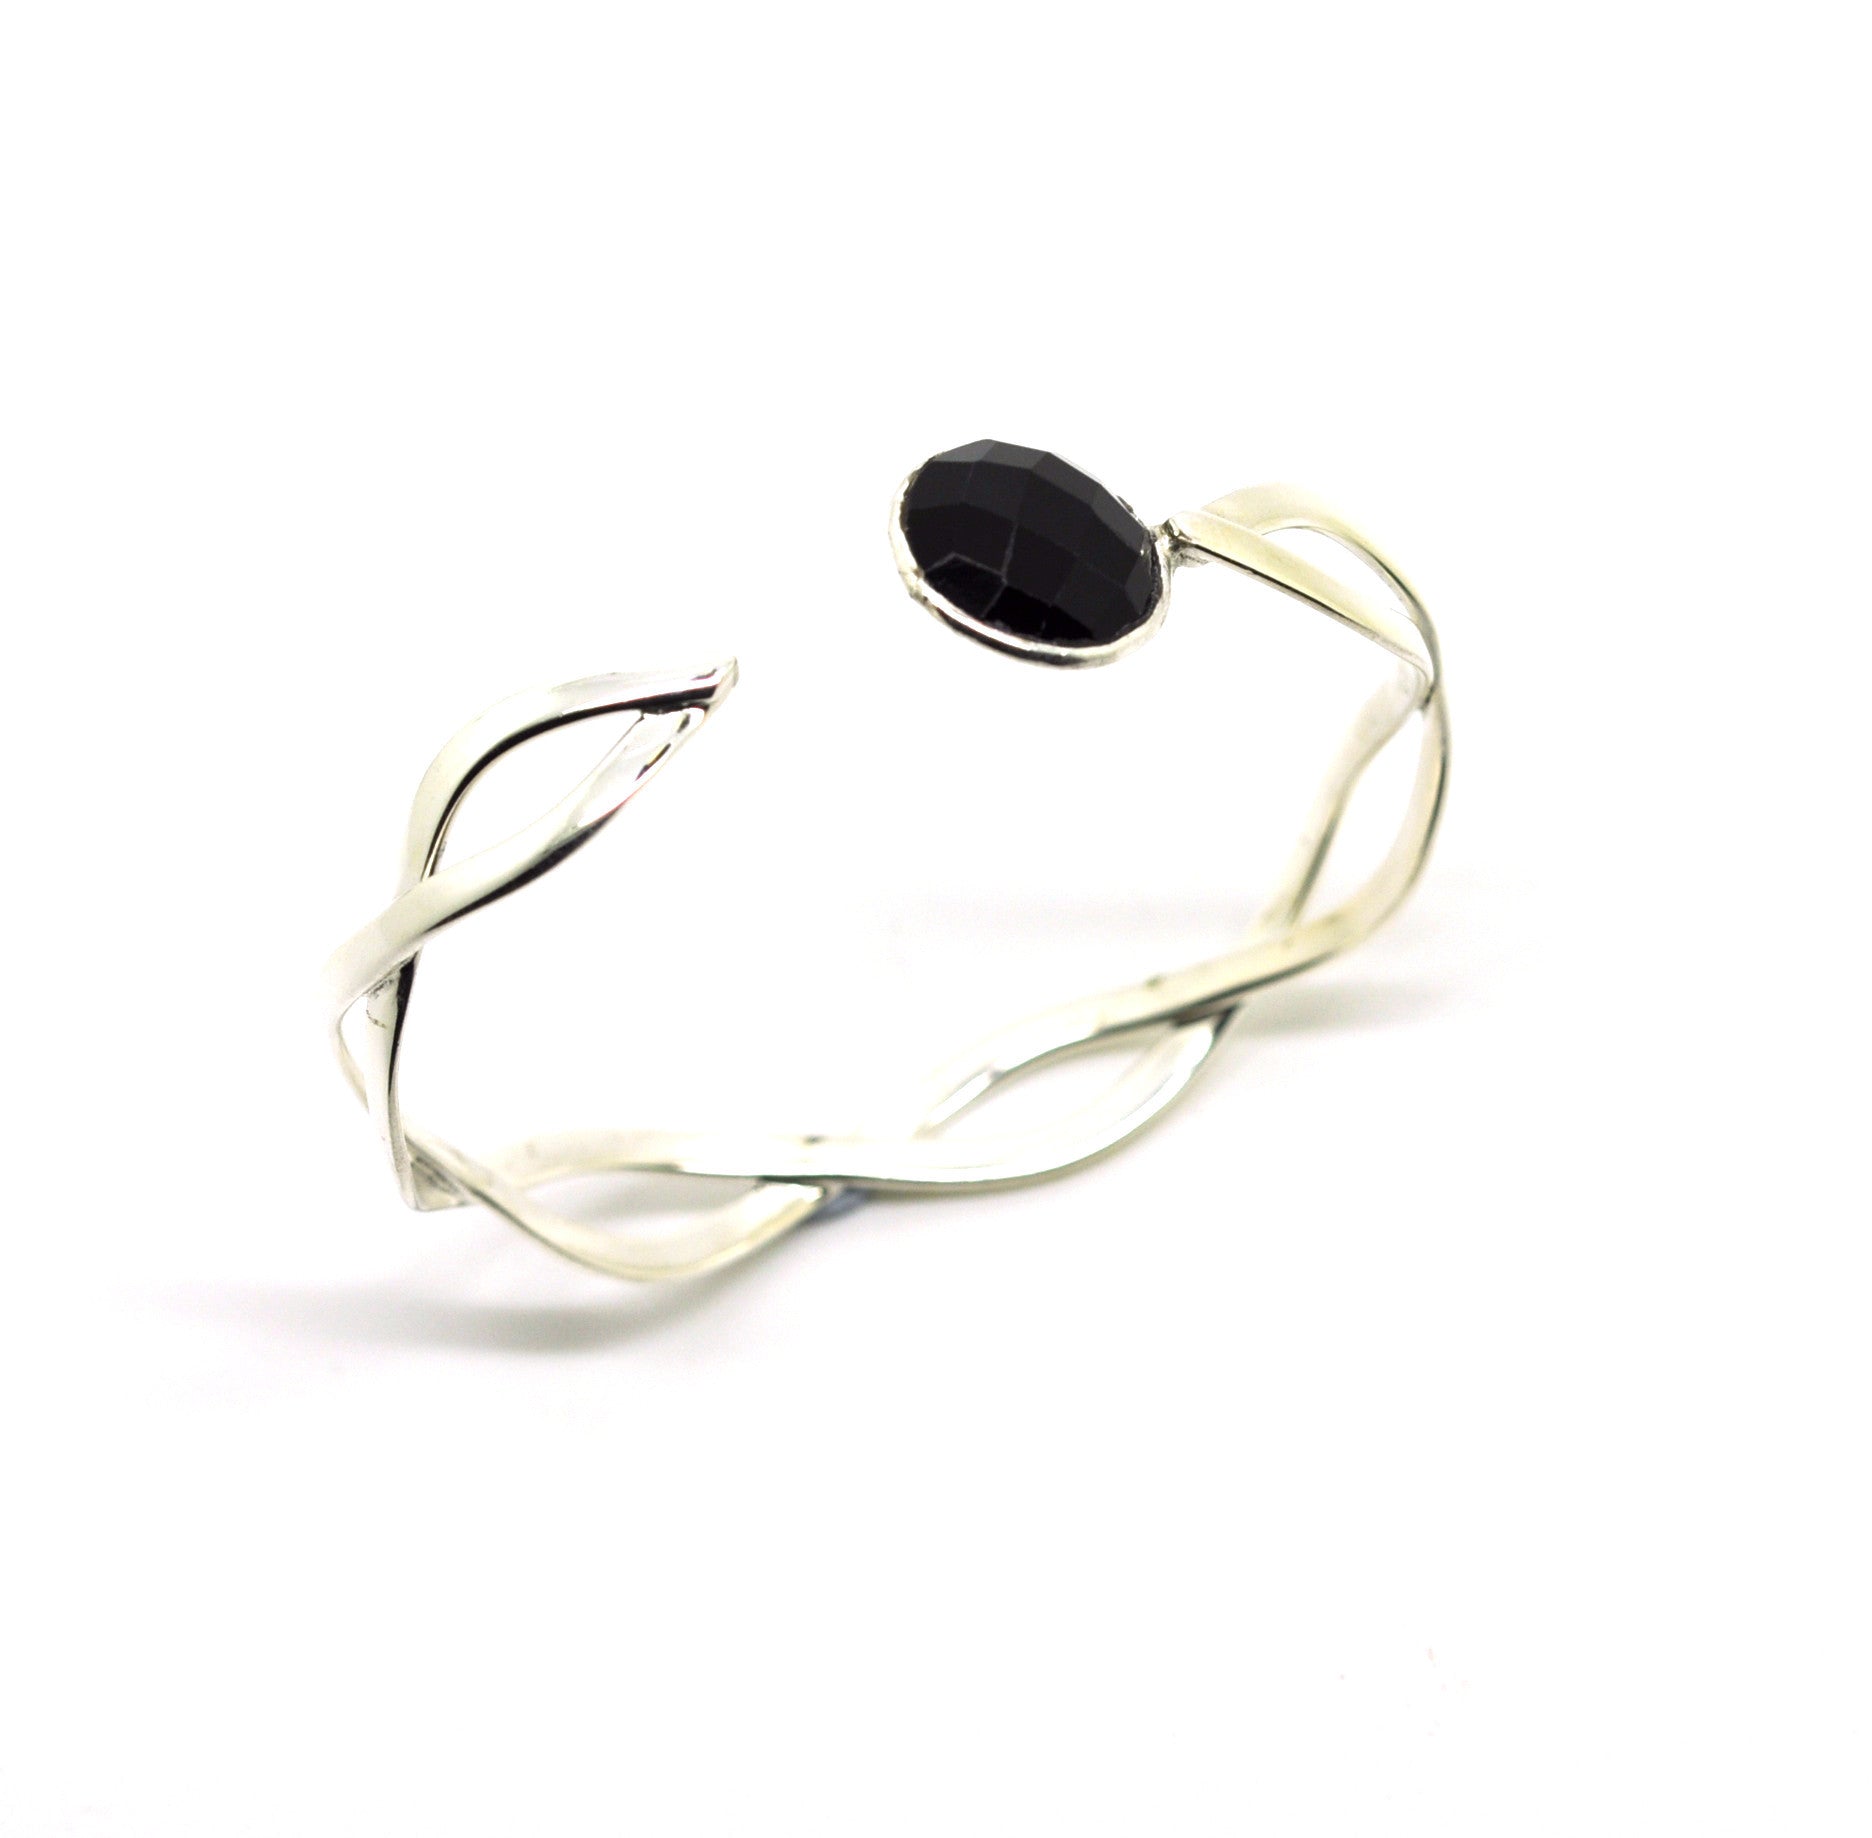 ON SALE twisted cuff - Black (Clearance)